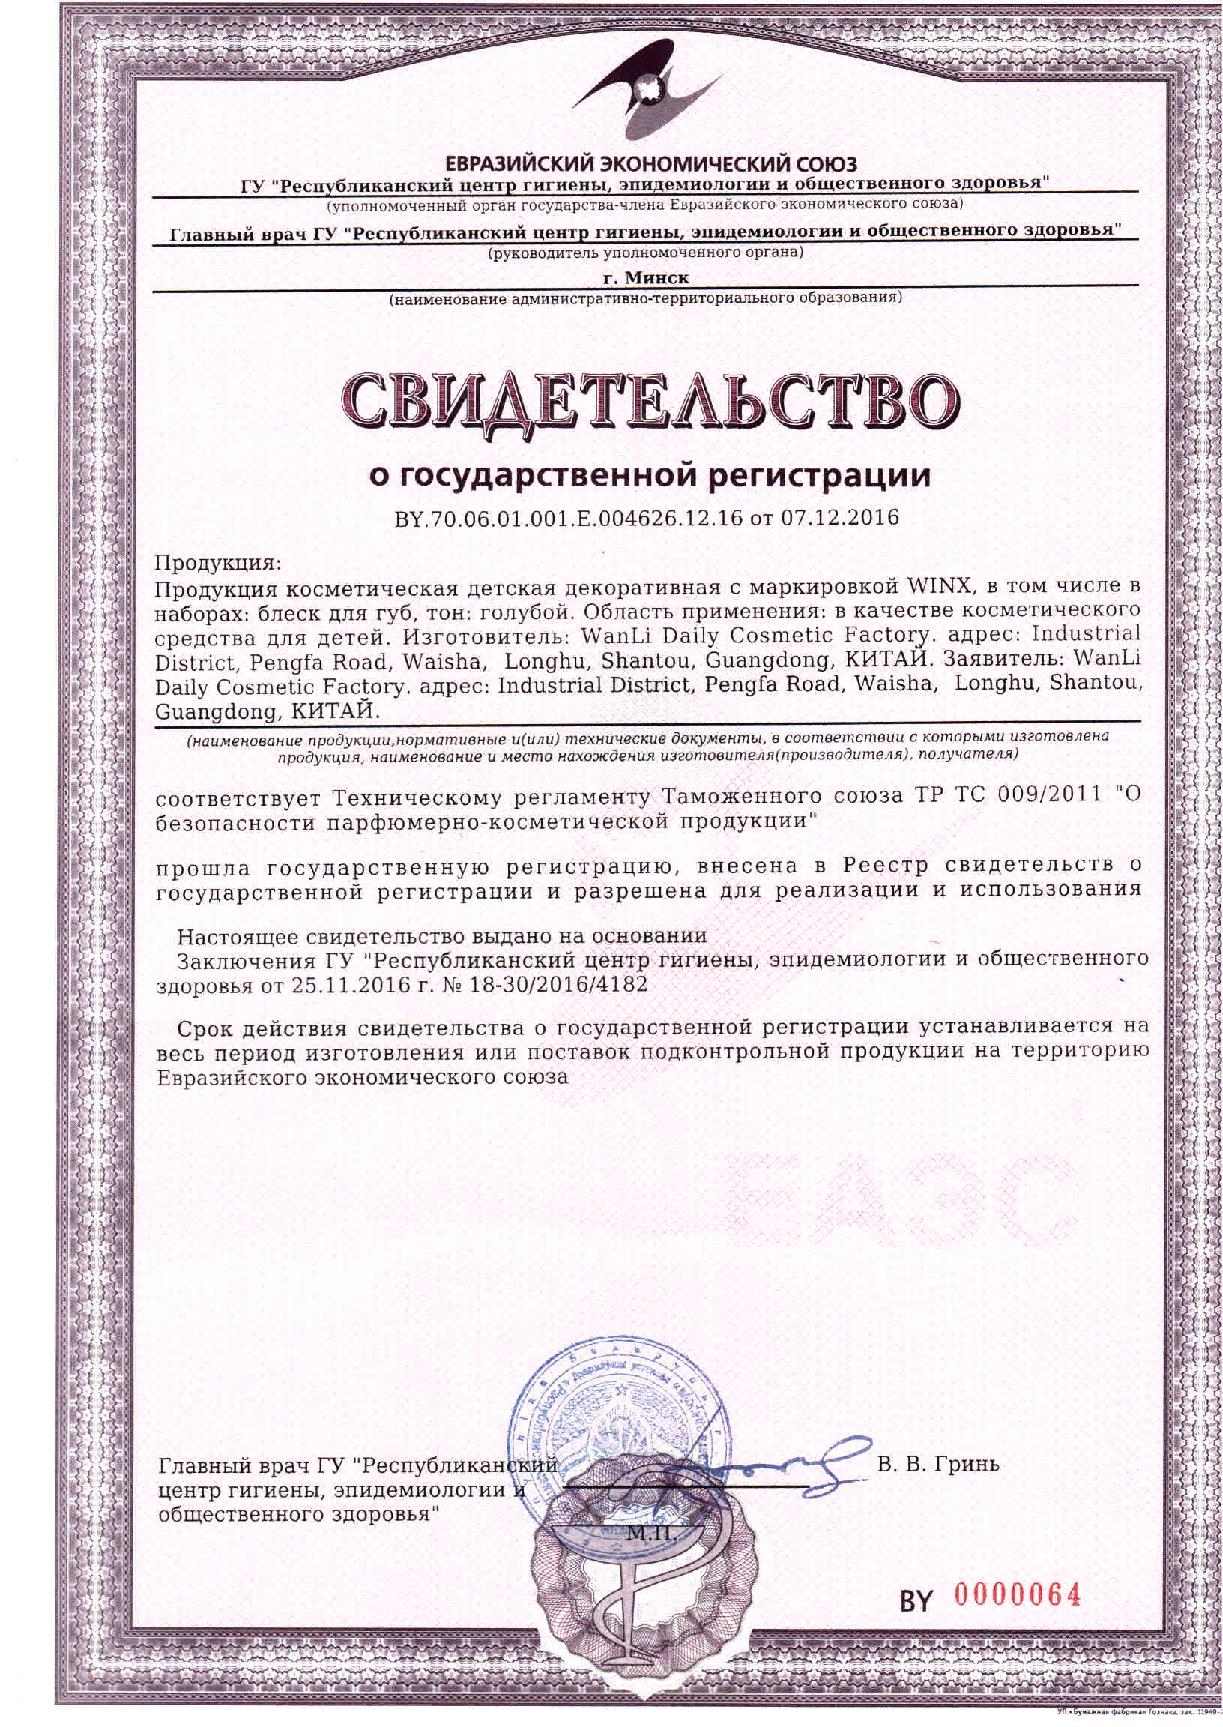 BY.70.06.01.001.E.004626.12.16: /images/certificates/BY.70.06.01.001.E.004626.12.16.jpg